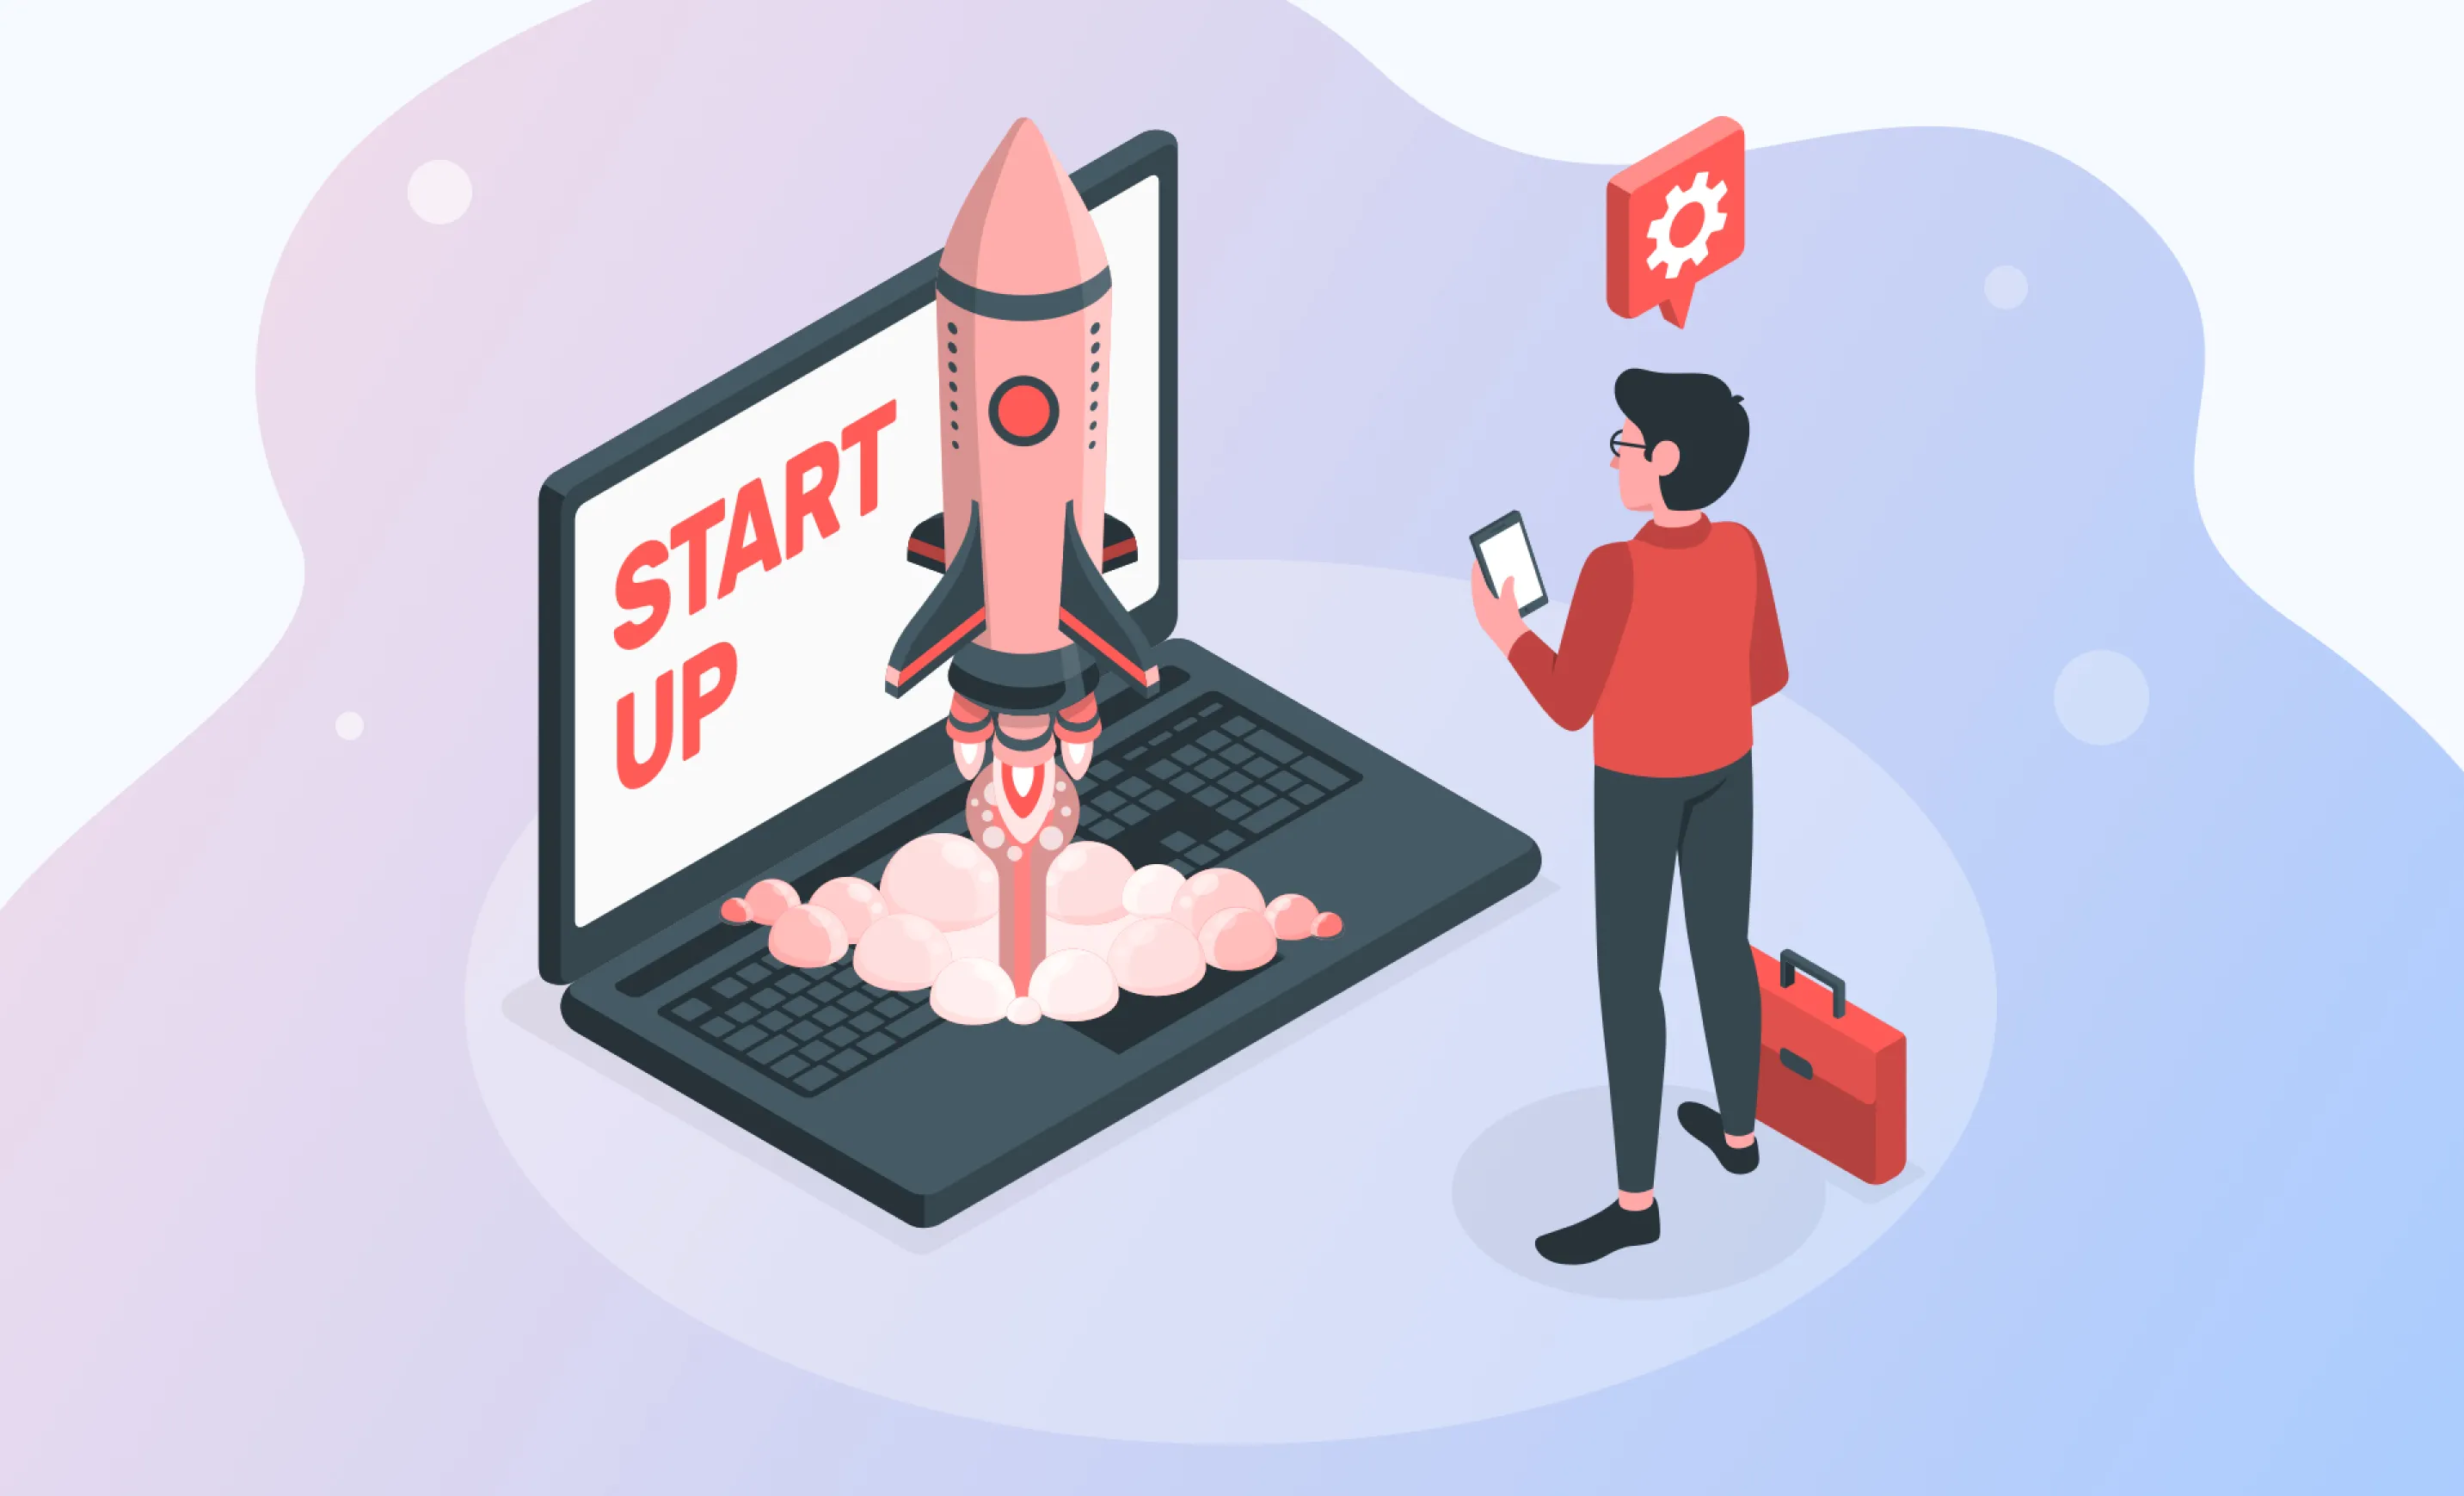 How to launch an IT startup and what it consists of